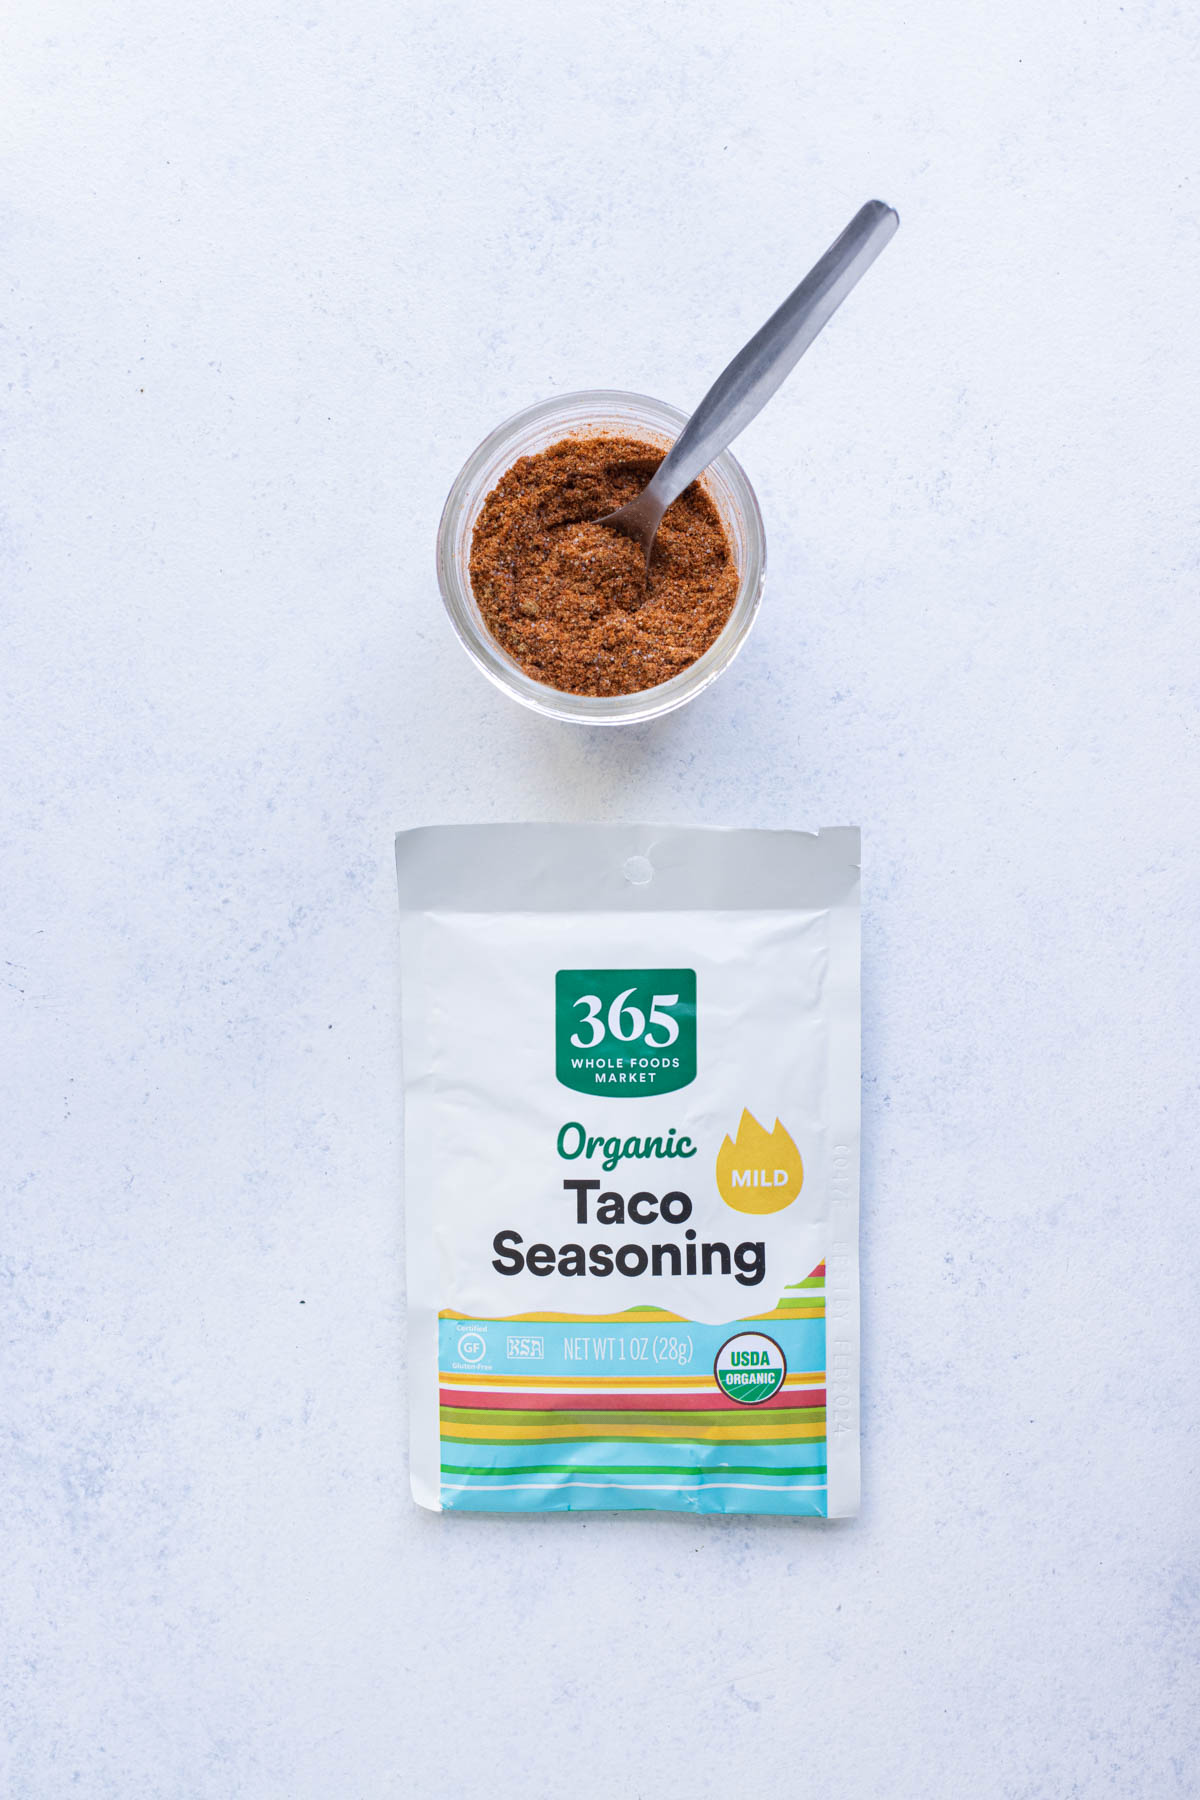 You can buy or make your own taco seasoning.